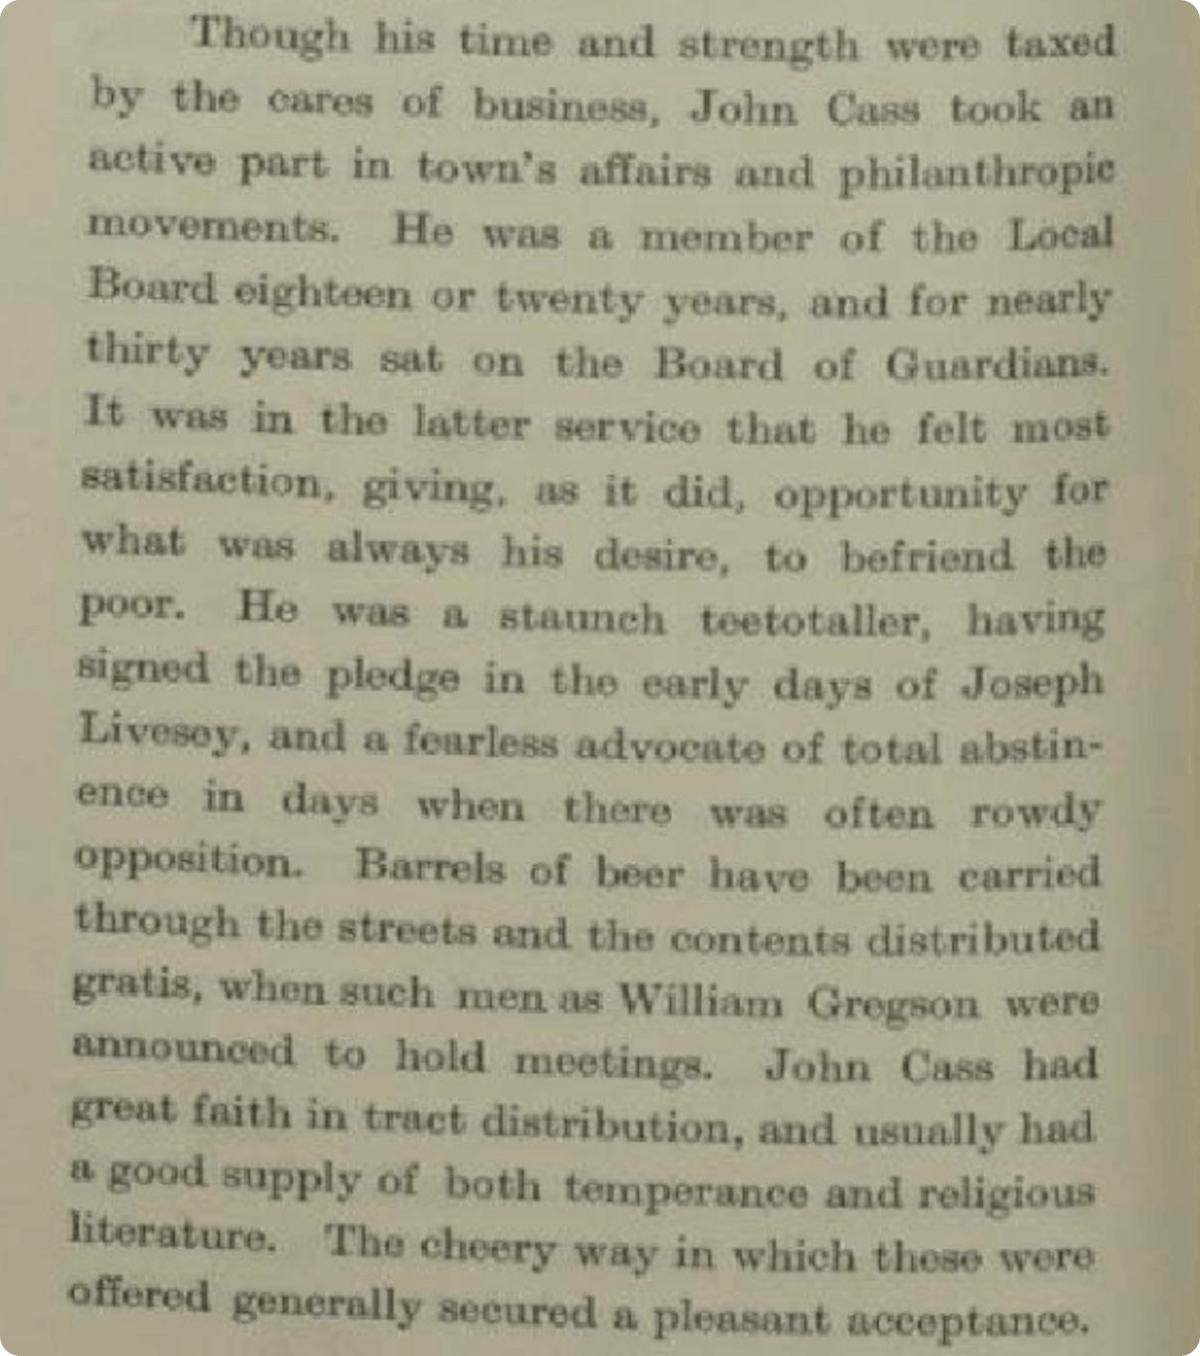 An incredible section of the memoir of John Cass, detailing his philanthropy and teetotal lifestyle.